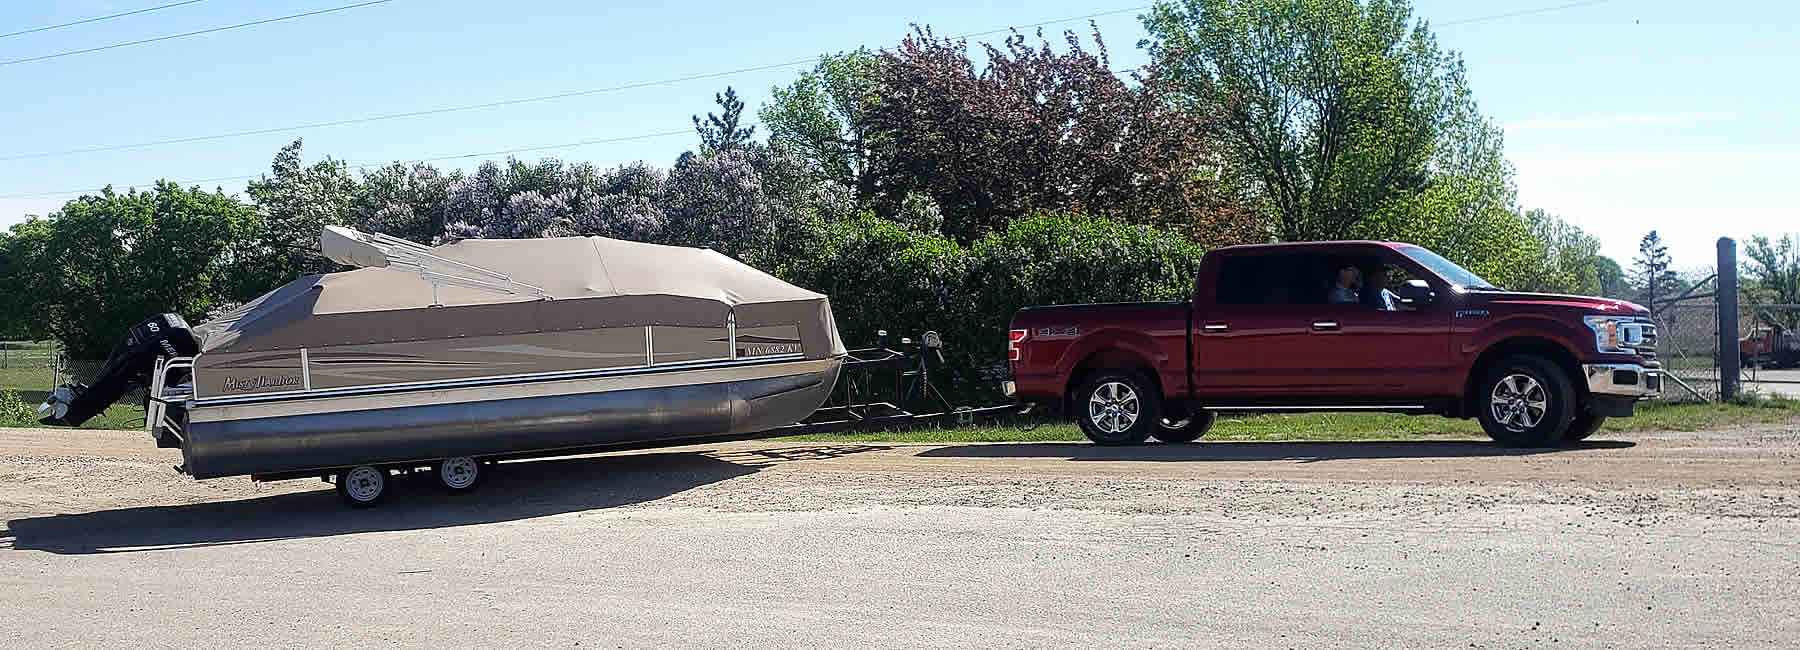 Have a new pontoon cover made by Tarps R Uss of Hawley, Minnesota.